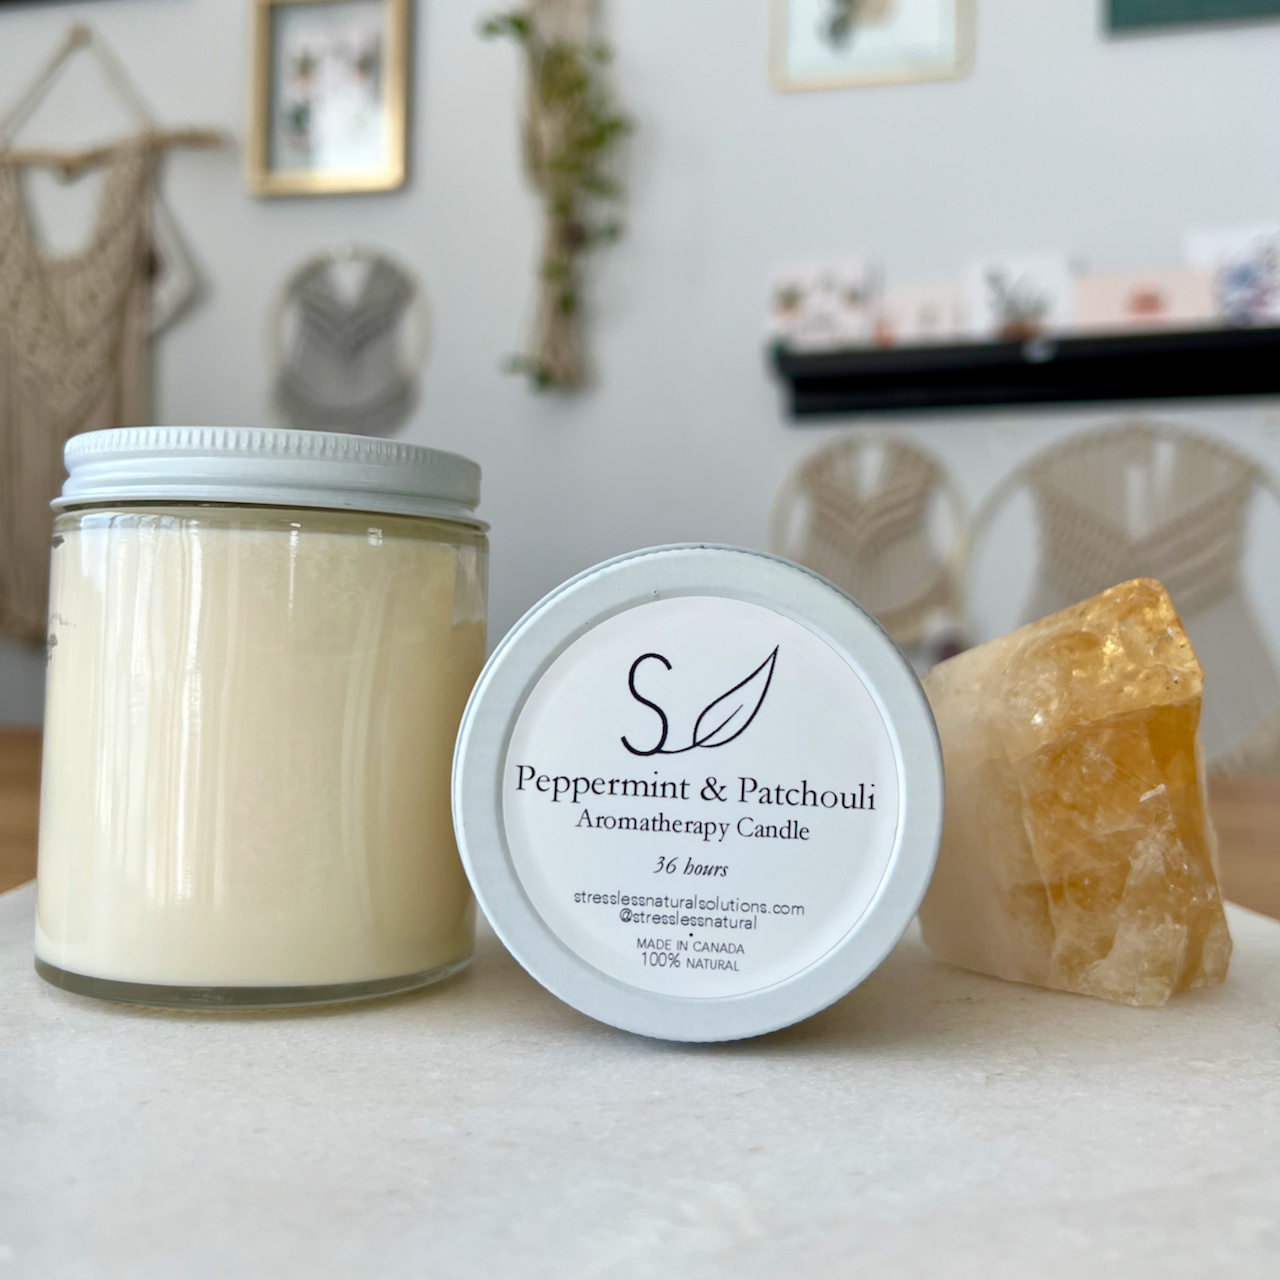 Peppermint & Patchouli Aromatherapy Candle